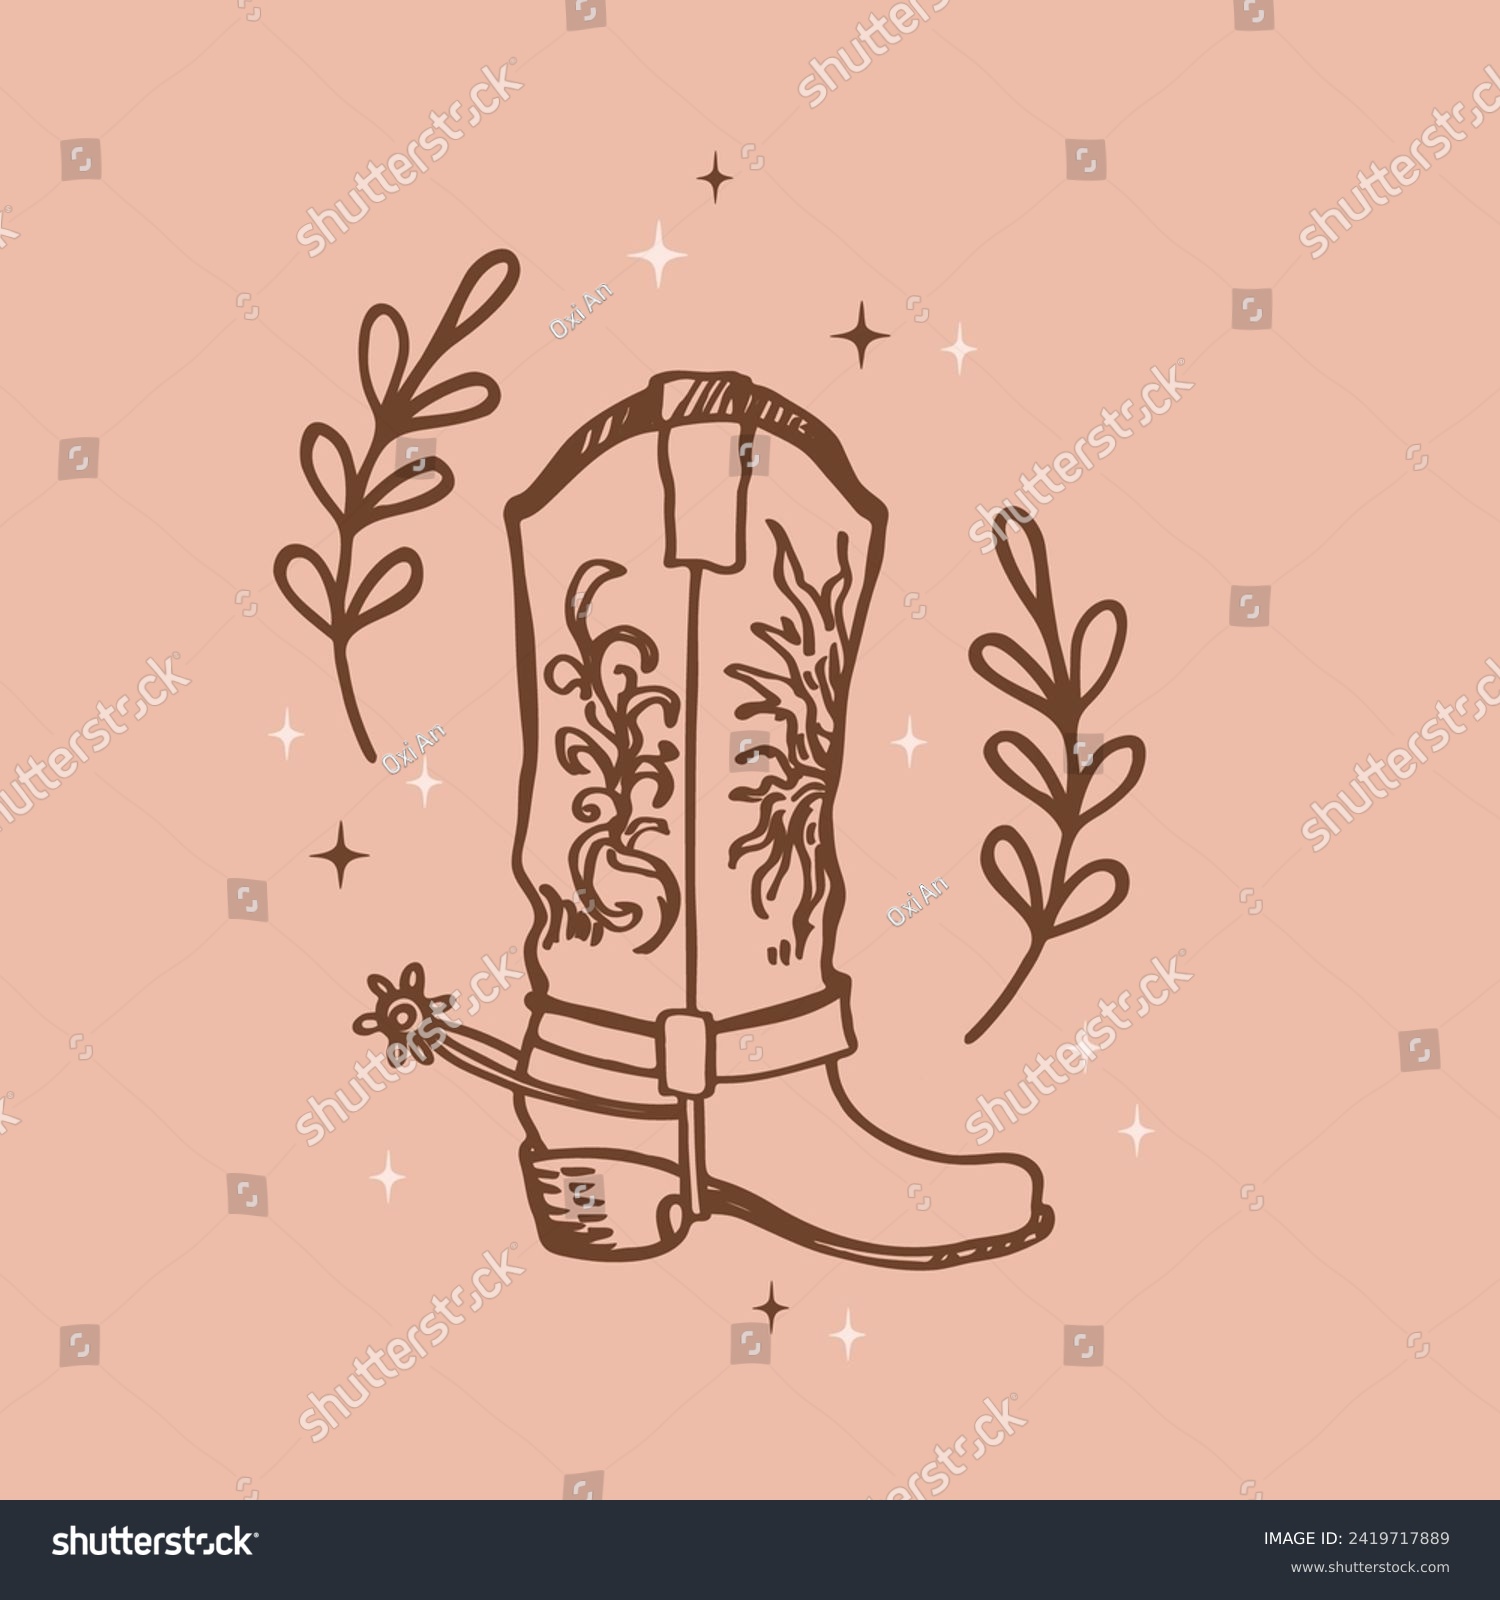 SVG of Cowboy boots sketch boho background hand drawn vector illustration Wild West shoes and stars design retro element for poster, print, card, icon, flyer, paper, wrapping. Lifestyle, fashion, art svg